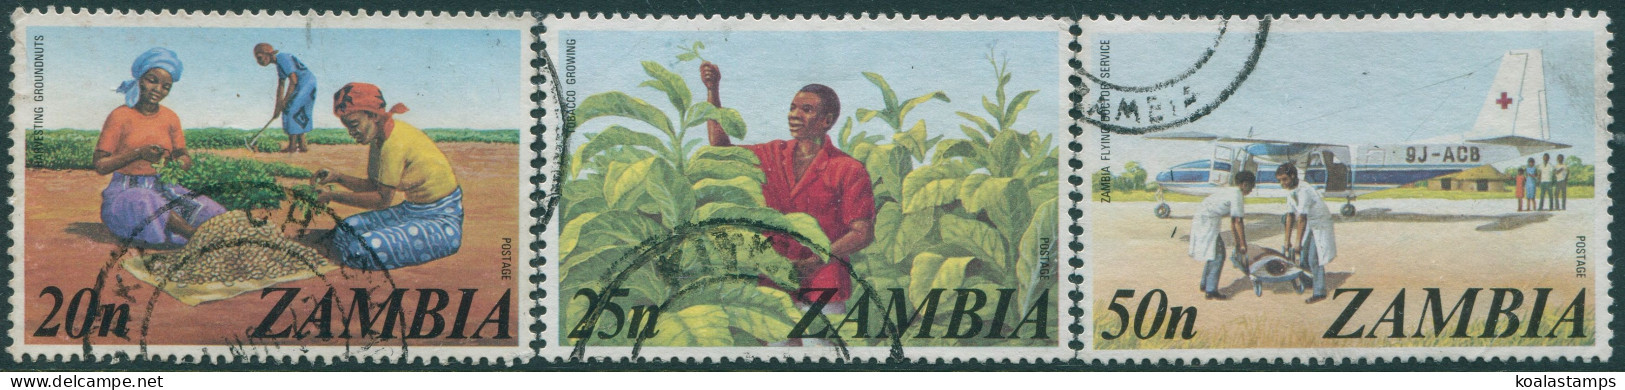 Zambia 1975 SG235-237 Ground Nuts Tobacco And Royal Flying Doctor (3) FU - Zambia (1965-...)